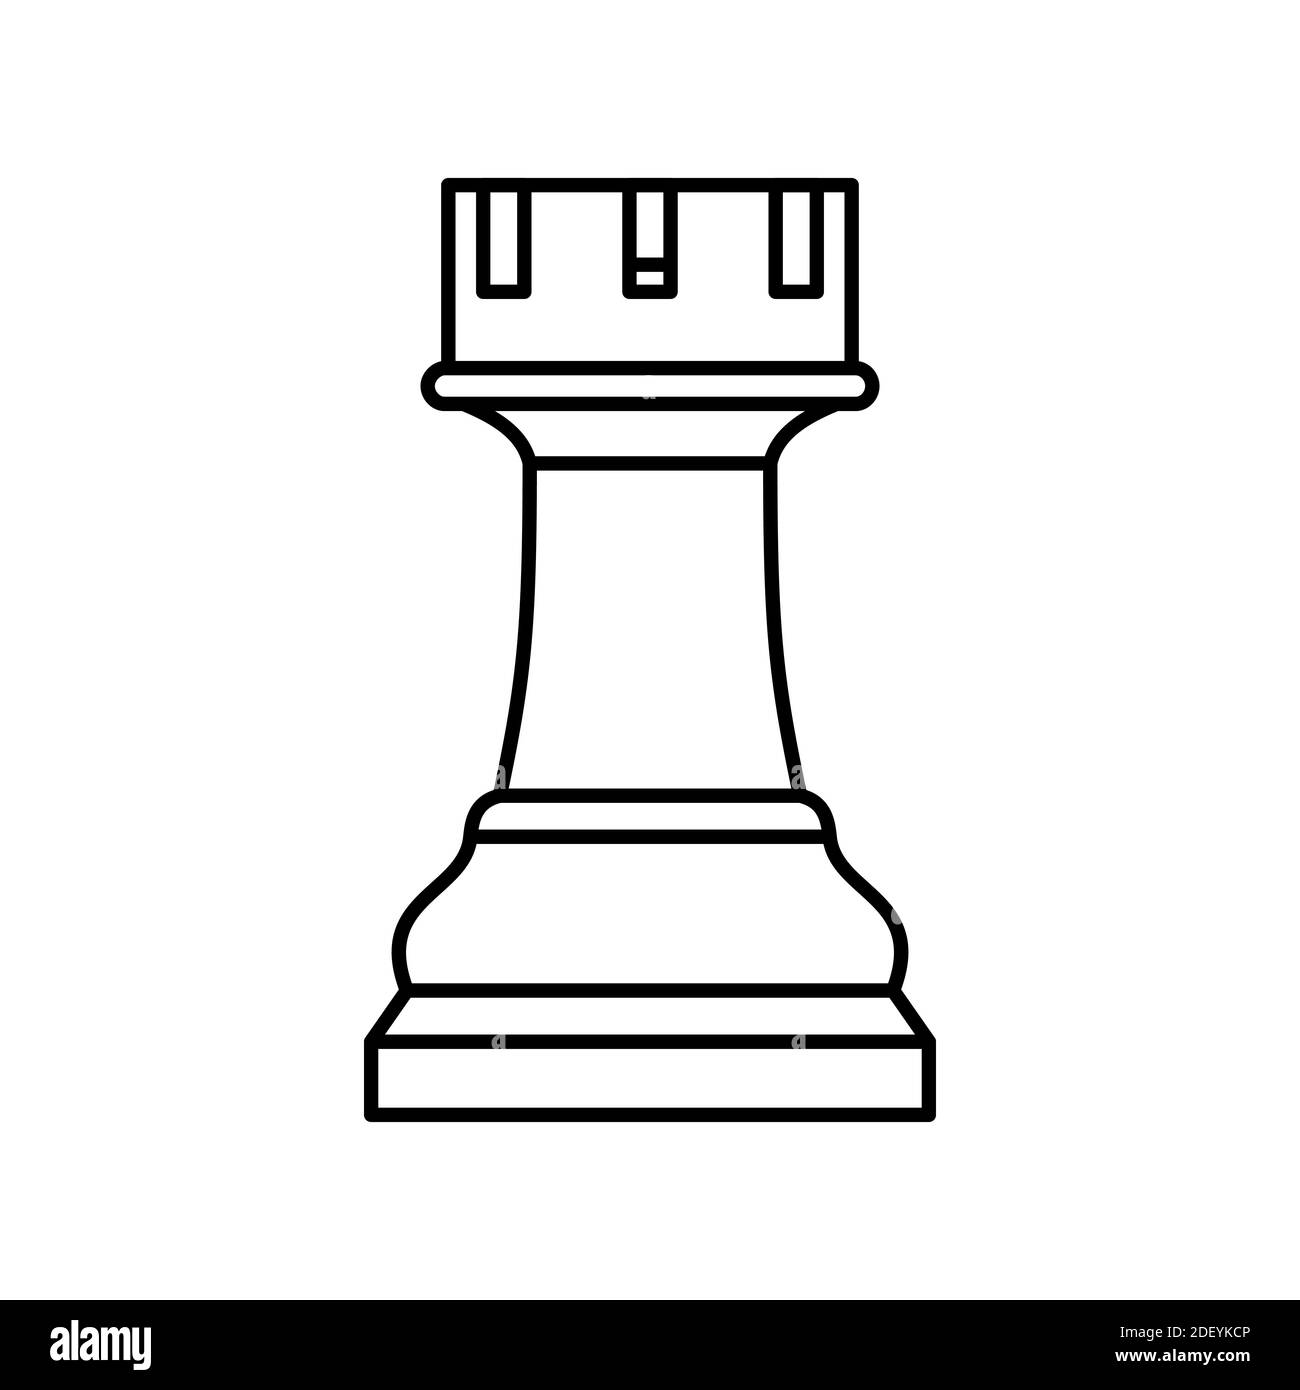 Chess Pieces - Rook White